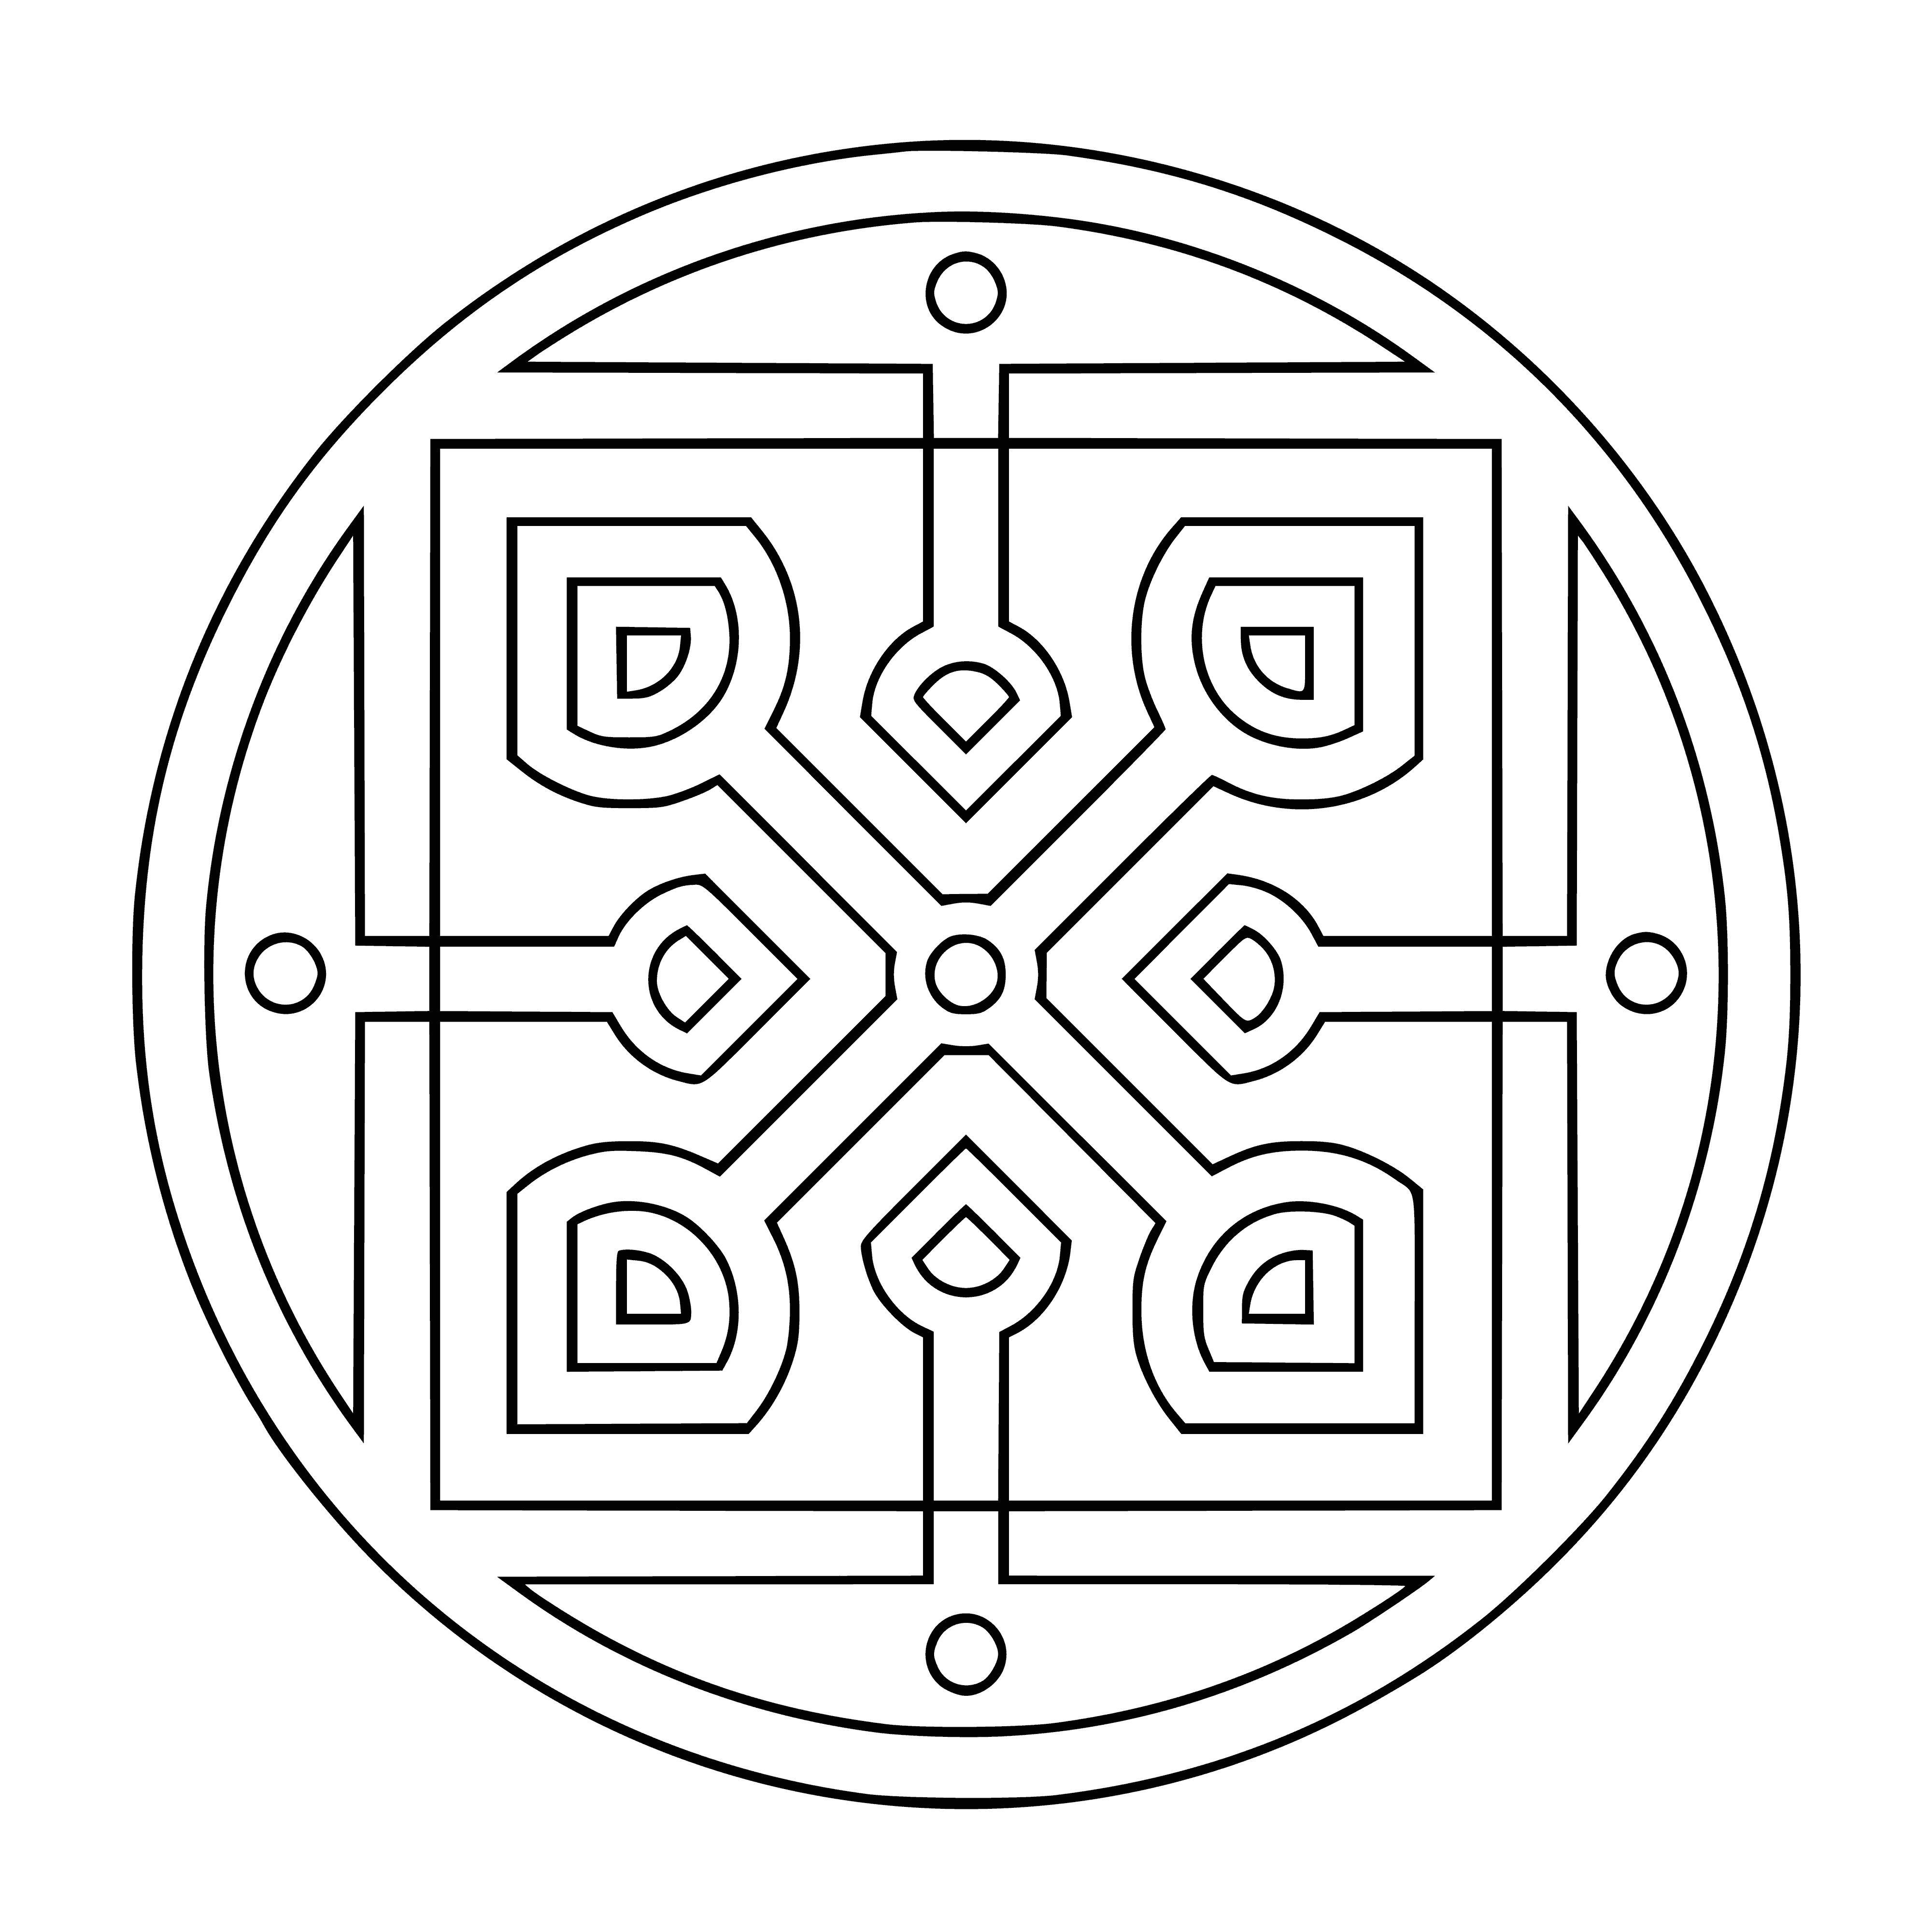 coloring page: Circle w/radial & concentric patterns creates balance & harmony.